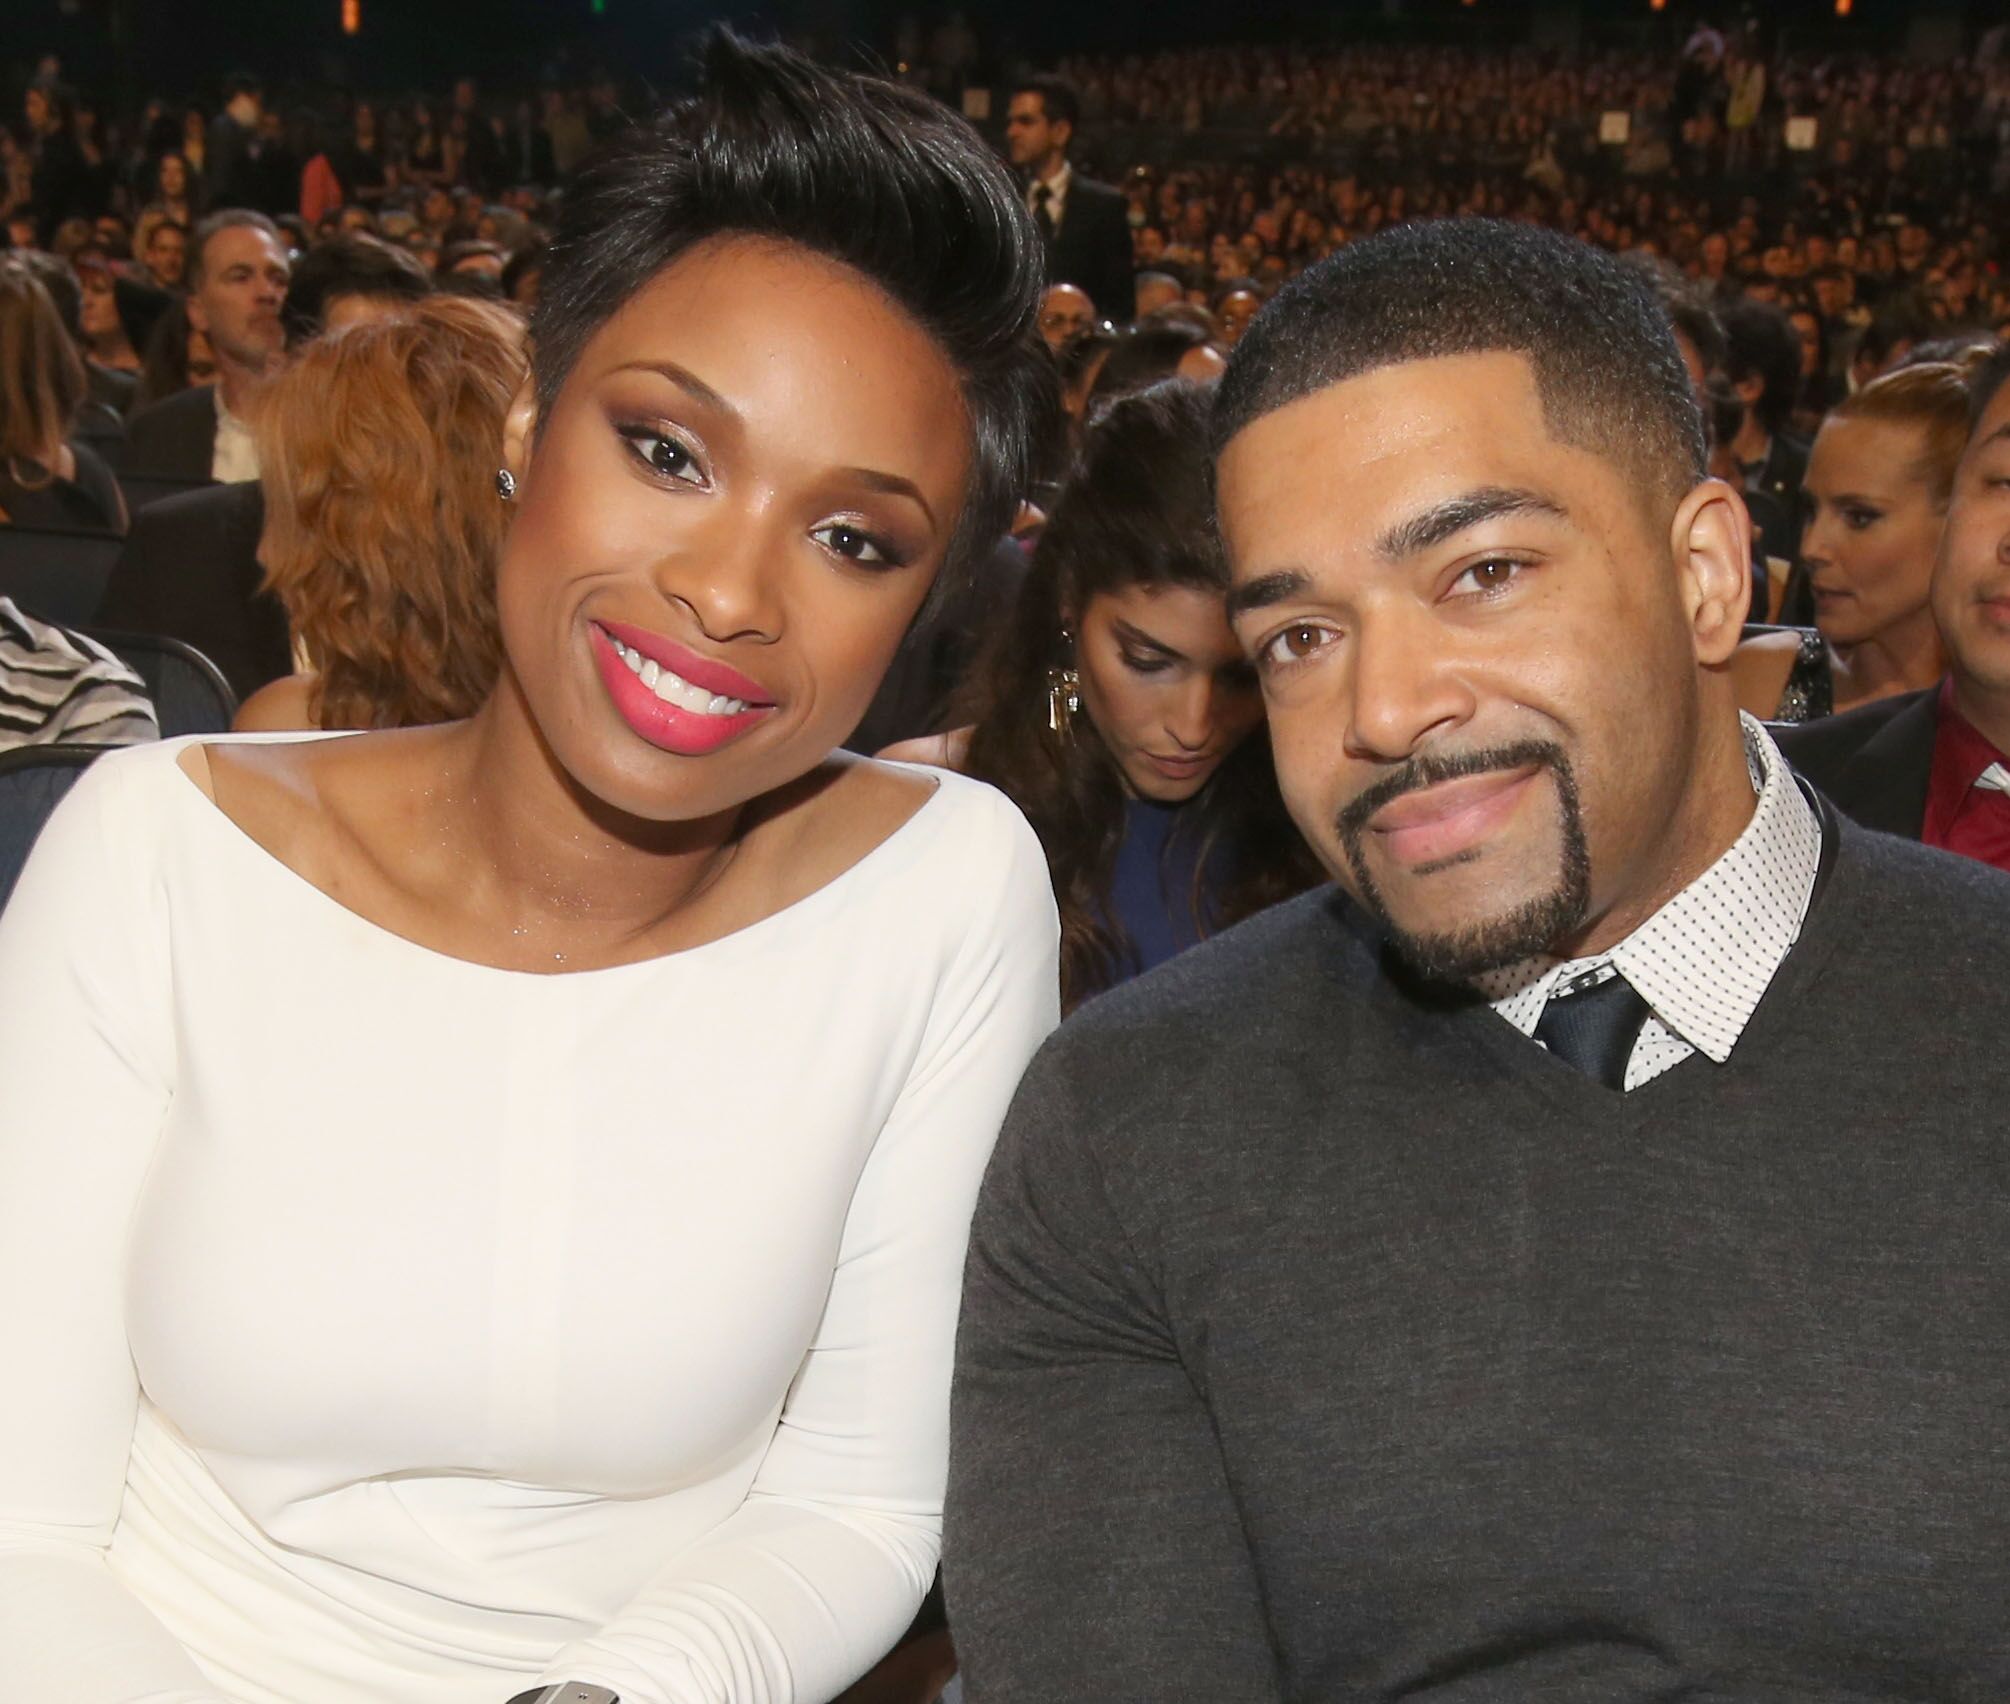 Jennifer Hudson and David Otunga attend The 40th Annual People's Choice Awards at Nokia Theatre L.A. Live | Photo: Getty Images